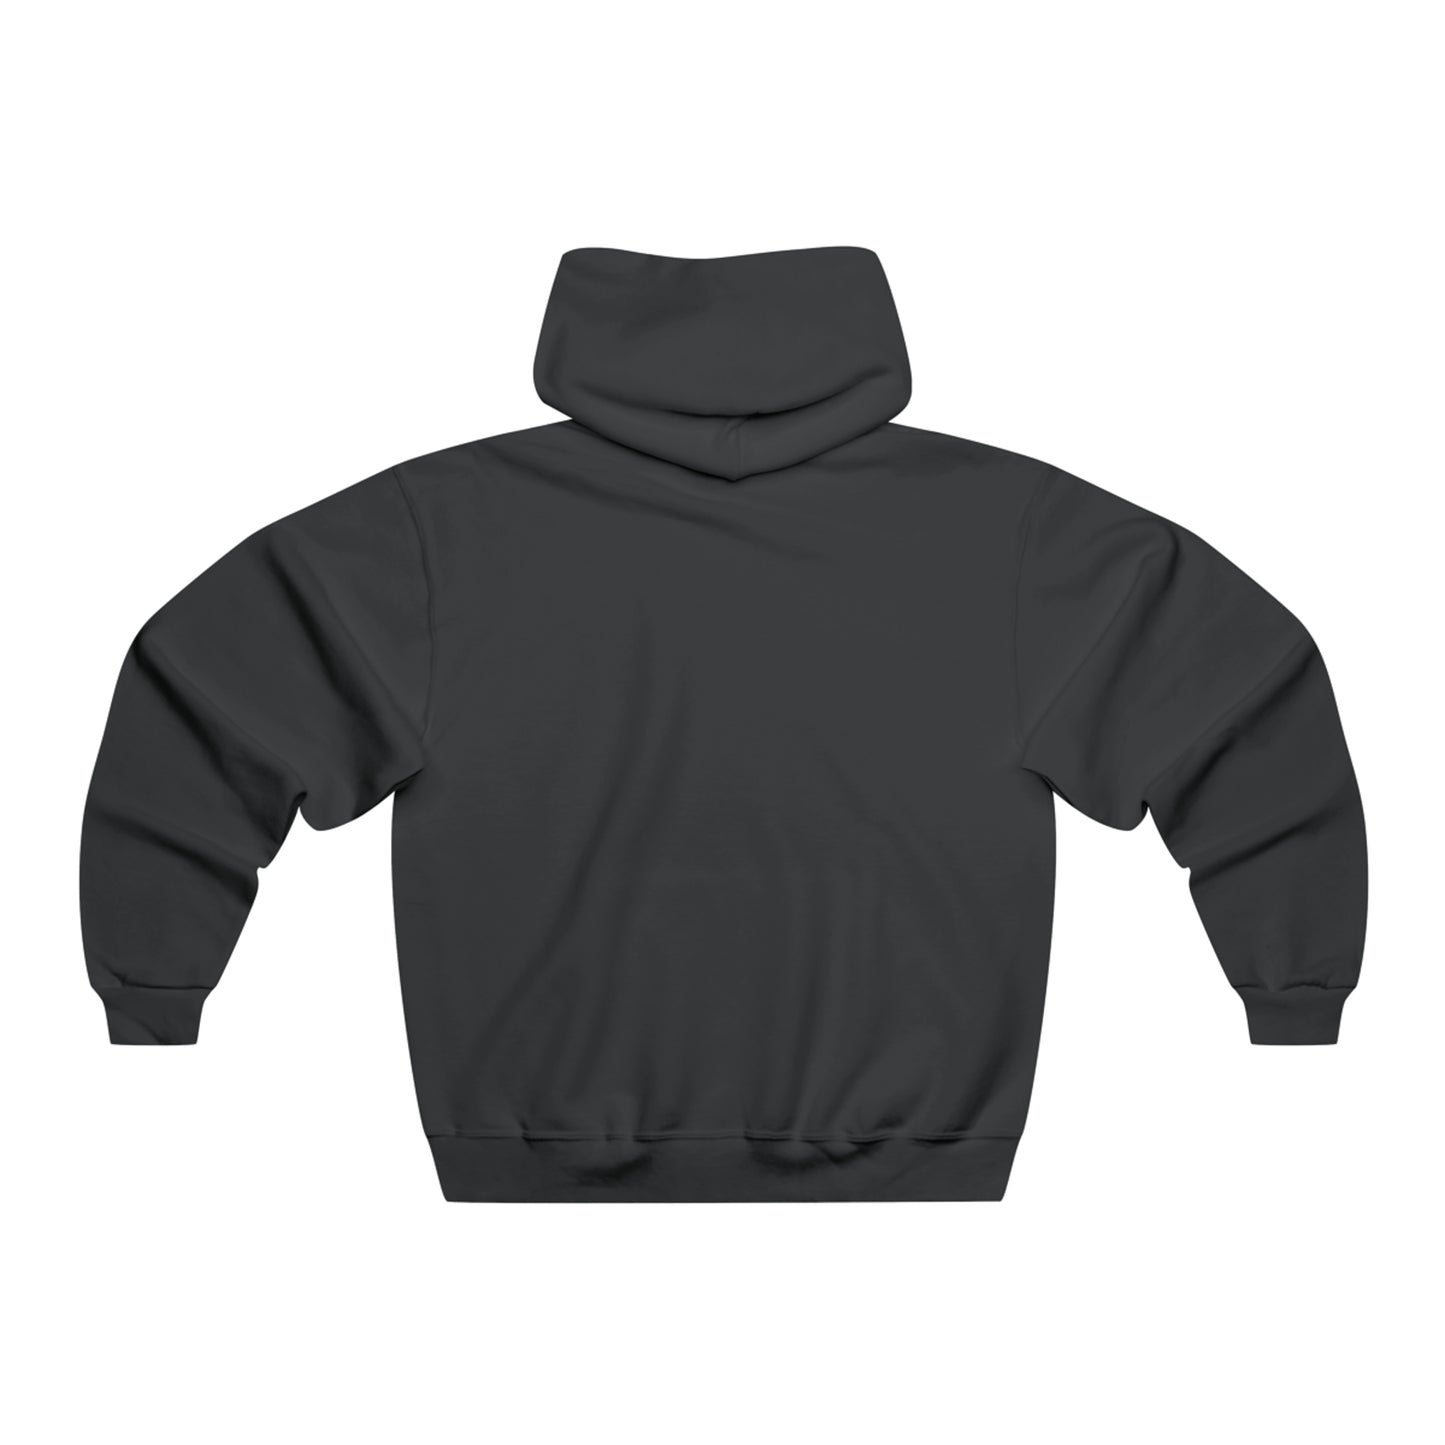 Biggest Pump Cover for the Middest Physique Hoodie